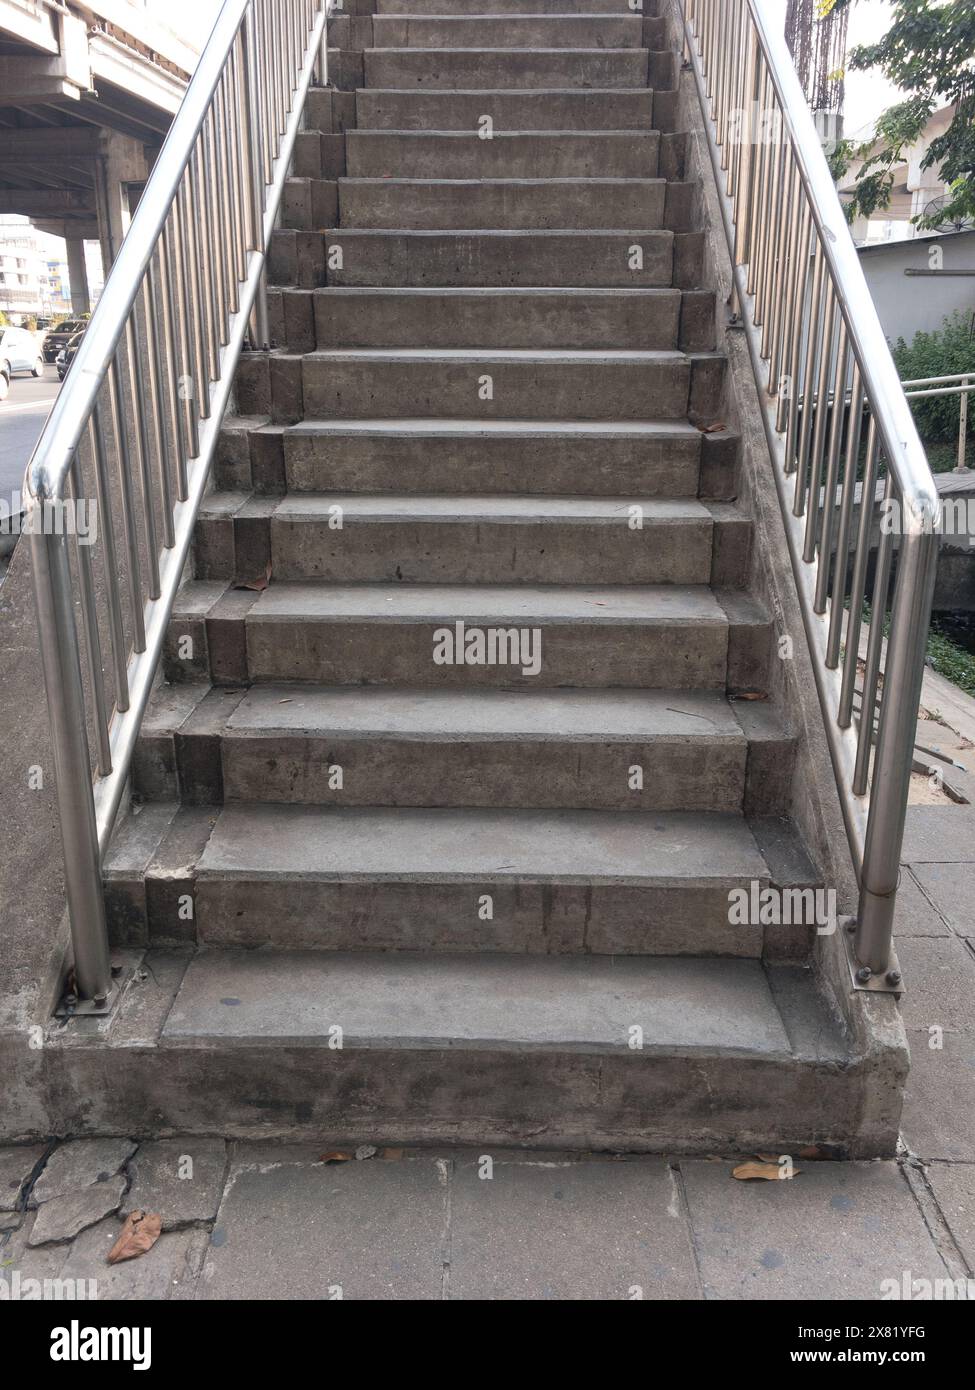 The concrete staircase of the overpass bridge near the junction in the city, stainless steel railing along the way, front view with the copy space. Stock Photo